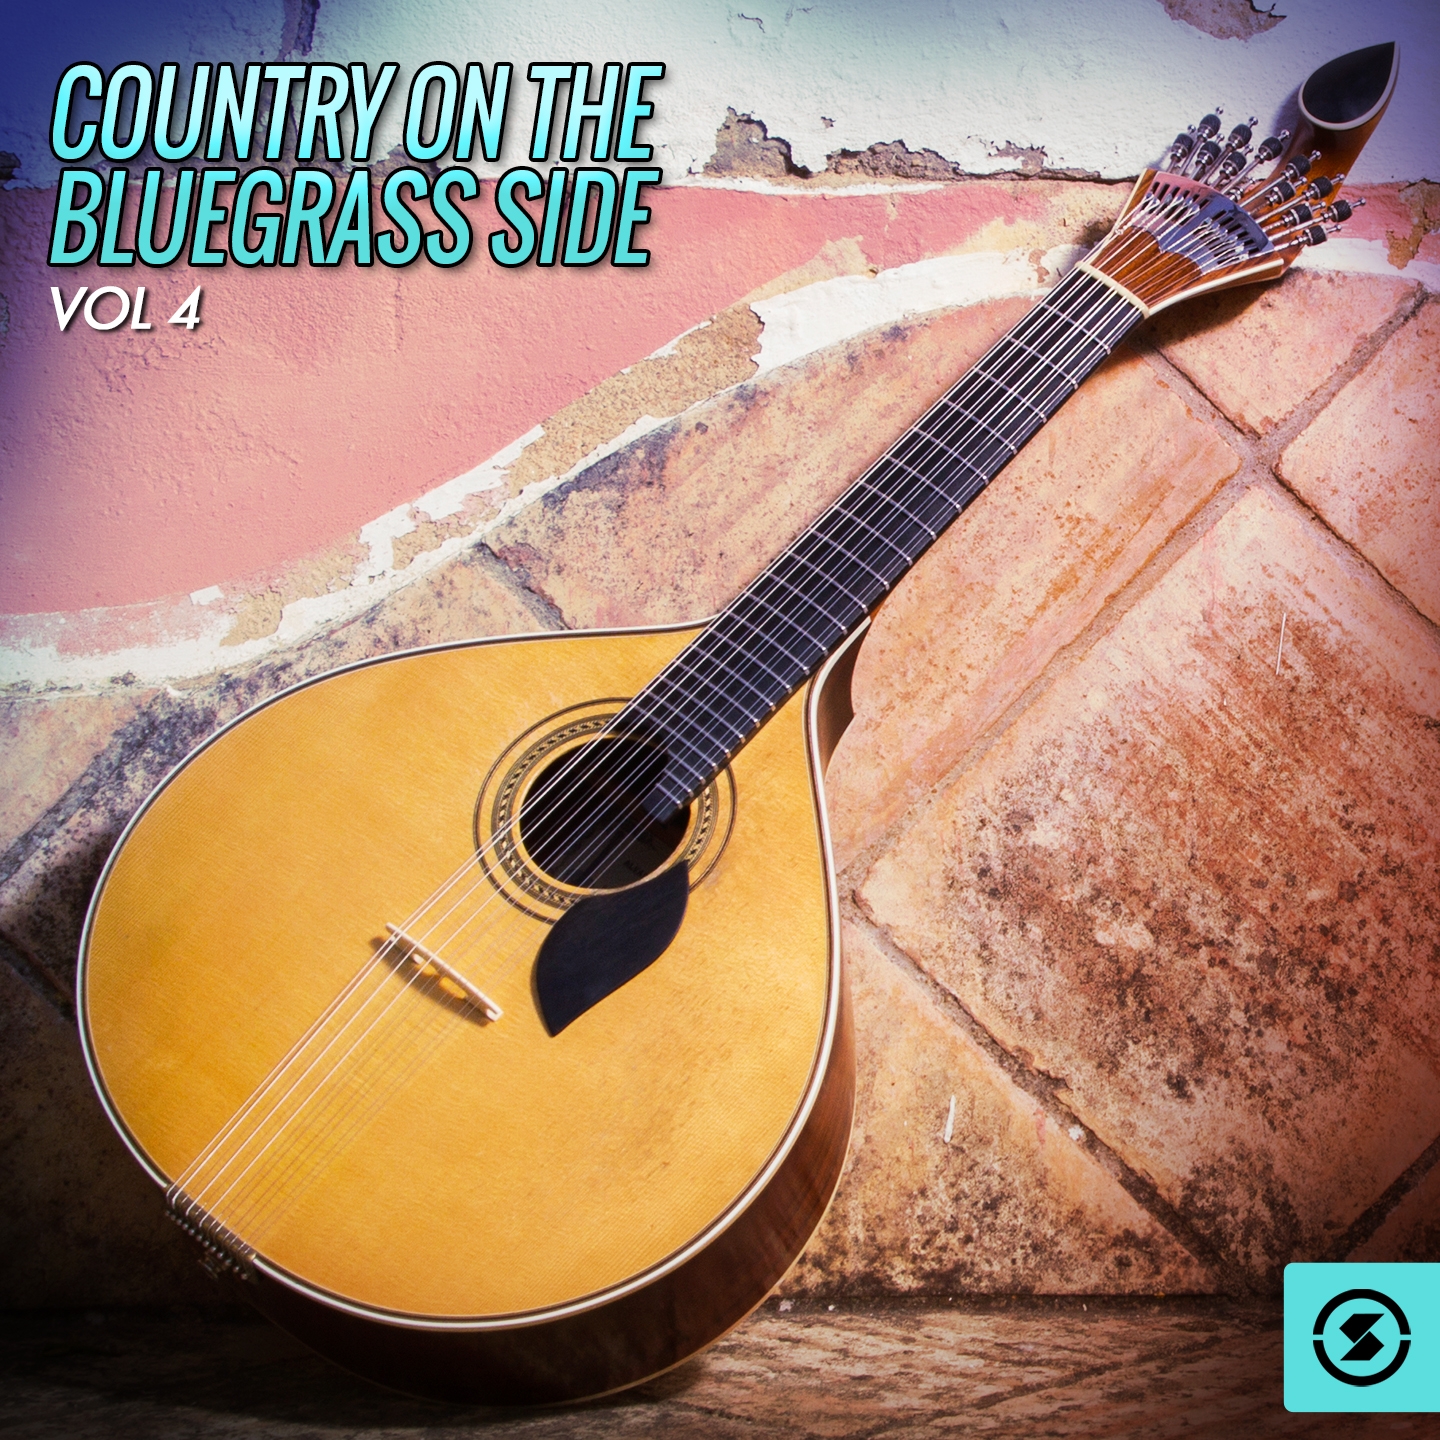 Country on the Bluegrass Side, Vol. 4